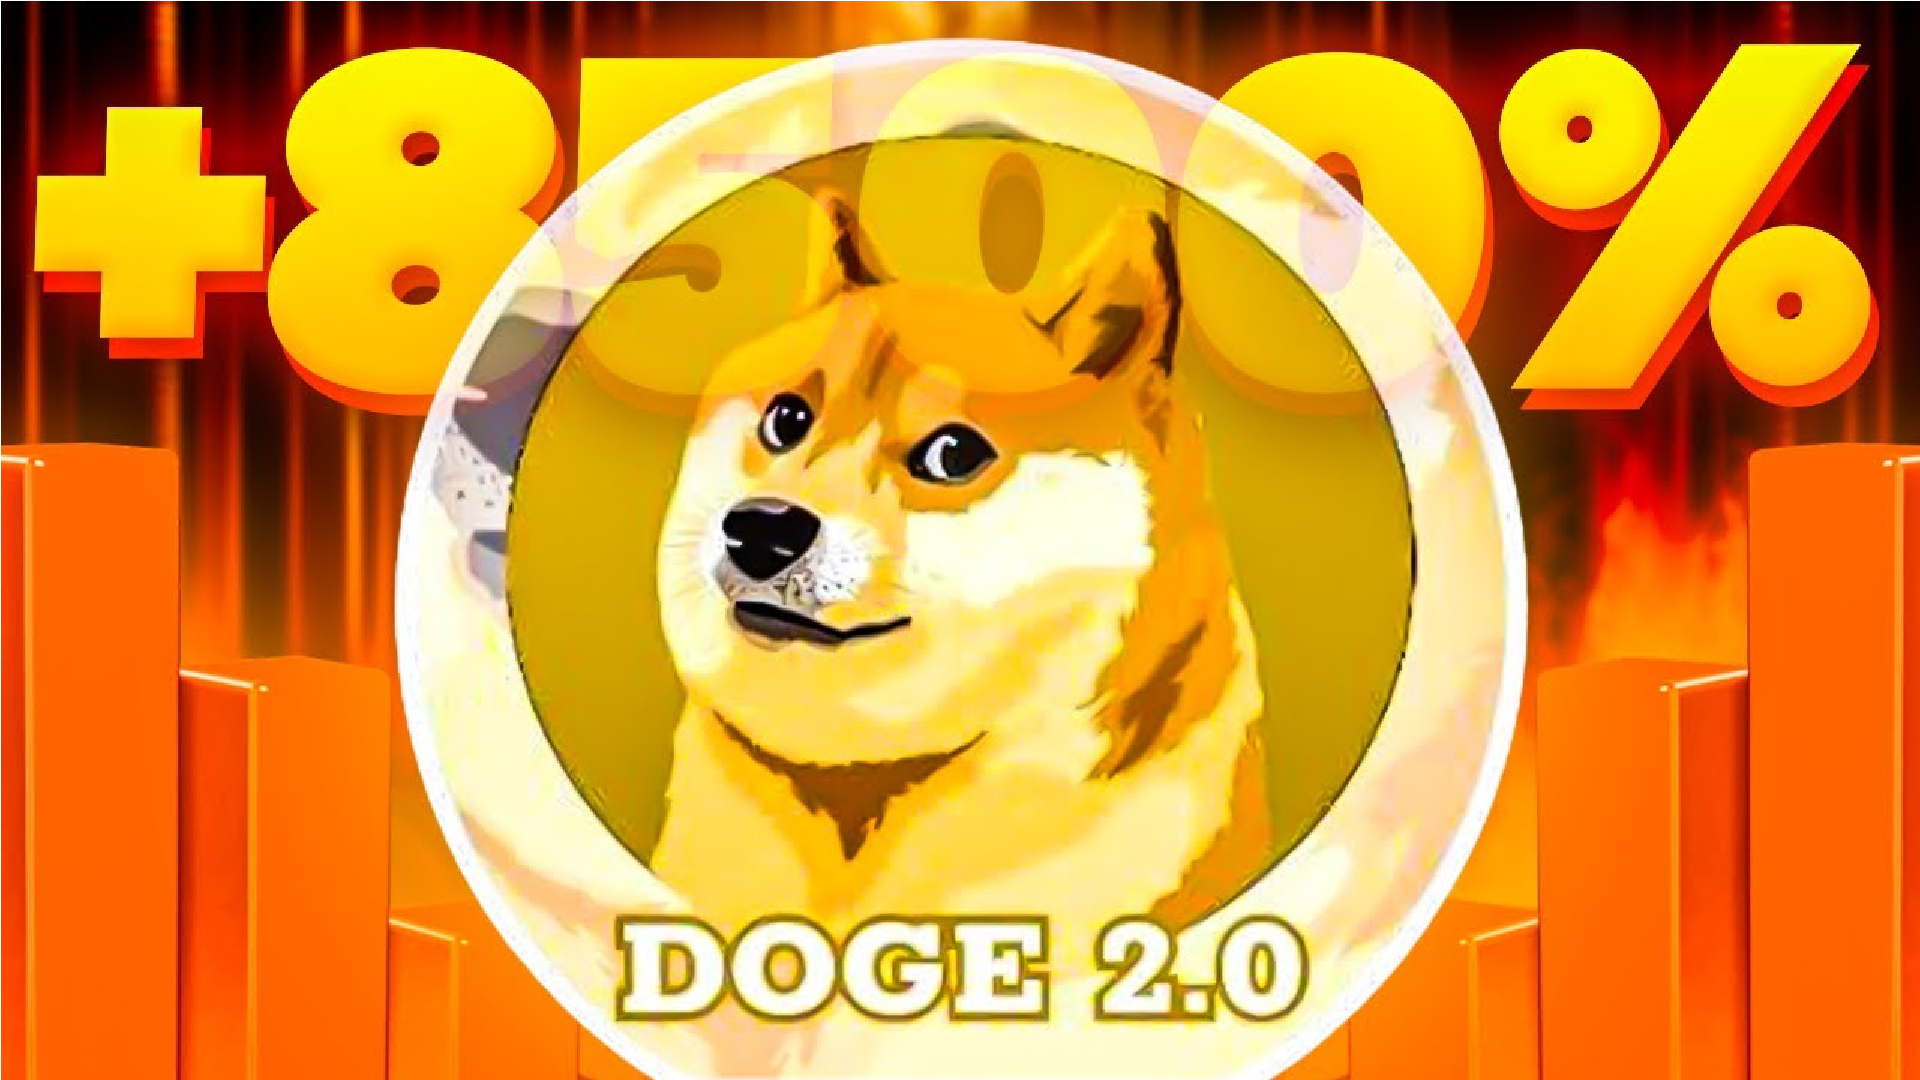 The 2.0 Meme Coins Trend – Will The Doge 2.0 Price Keep Going Up?